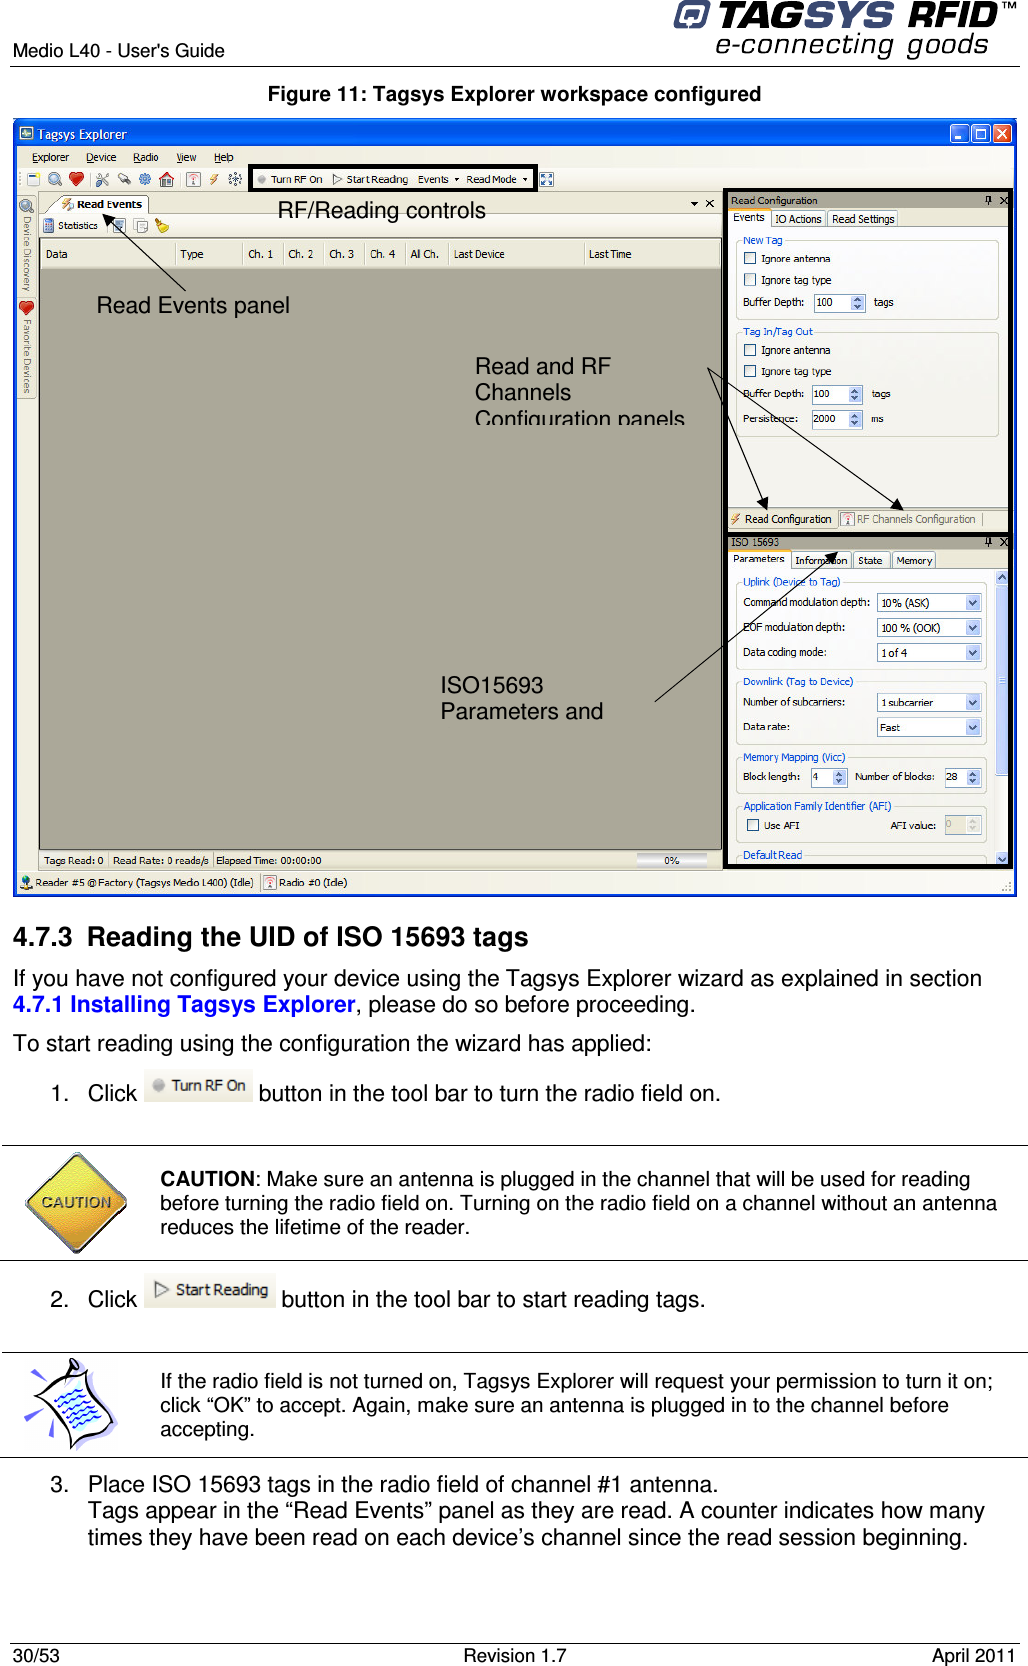  Medio L40 - User&apos;s Guide     30/53  Revision 1.7  April 2011  Figure 11: Tagsys Explorer workspace configured  4.7.3  Reading the UID of ISO 15693 tags If you have not configured your device using the Tagsys Explorer wizard as explained in section 4.7.1 Installing Tagsys Explorer, please do so before proceeding. To start reading using the configuration the wizard has applied: 1.  Click   button in the tool bar to turn the radio field on.   CAUTION: Make sure an antenna is plugged in the channel that will be used for reading before turning the radio field on. Turning on the radio field on a channel without an antenna reduces the lifetime of the reader. 2.  Click   button in the tool bar to start reading tags.   If the radio field is not turned on, Tagsys Explorer will request your permission to turn it on; click “OK” to accept. Again, make sure an antenna is plugged in to the channel before accepting. 3.  Place ISO 15693 tags in the radio field of channel #1 antenna. Tags appear in the “Read Events” panel as they are read. A counter indicates how many times they have been read on each device’s channel since the read session beginning.  RF/Reading controls  Read Events panel  Read and RF Channels Configuration panels   ISO15693 Parameters and Commands panel 